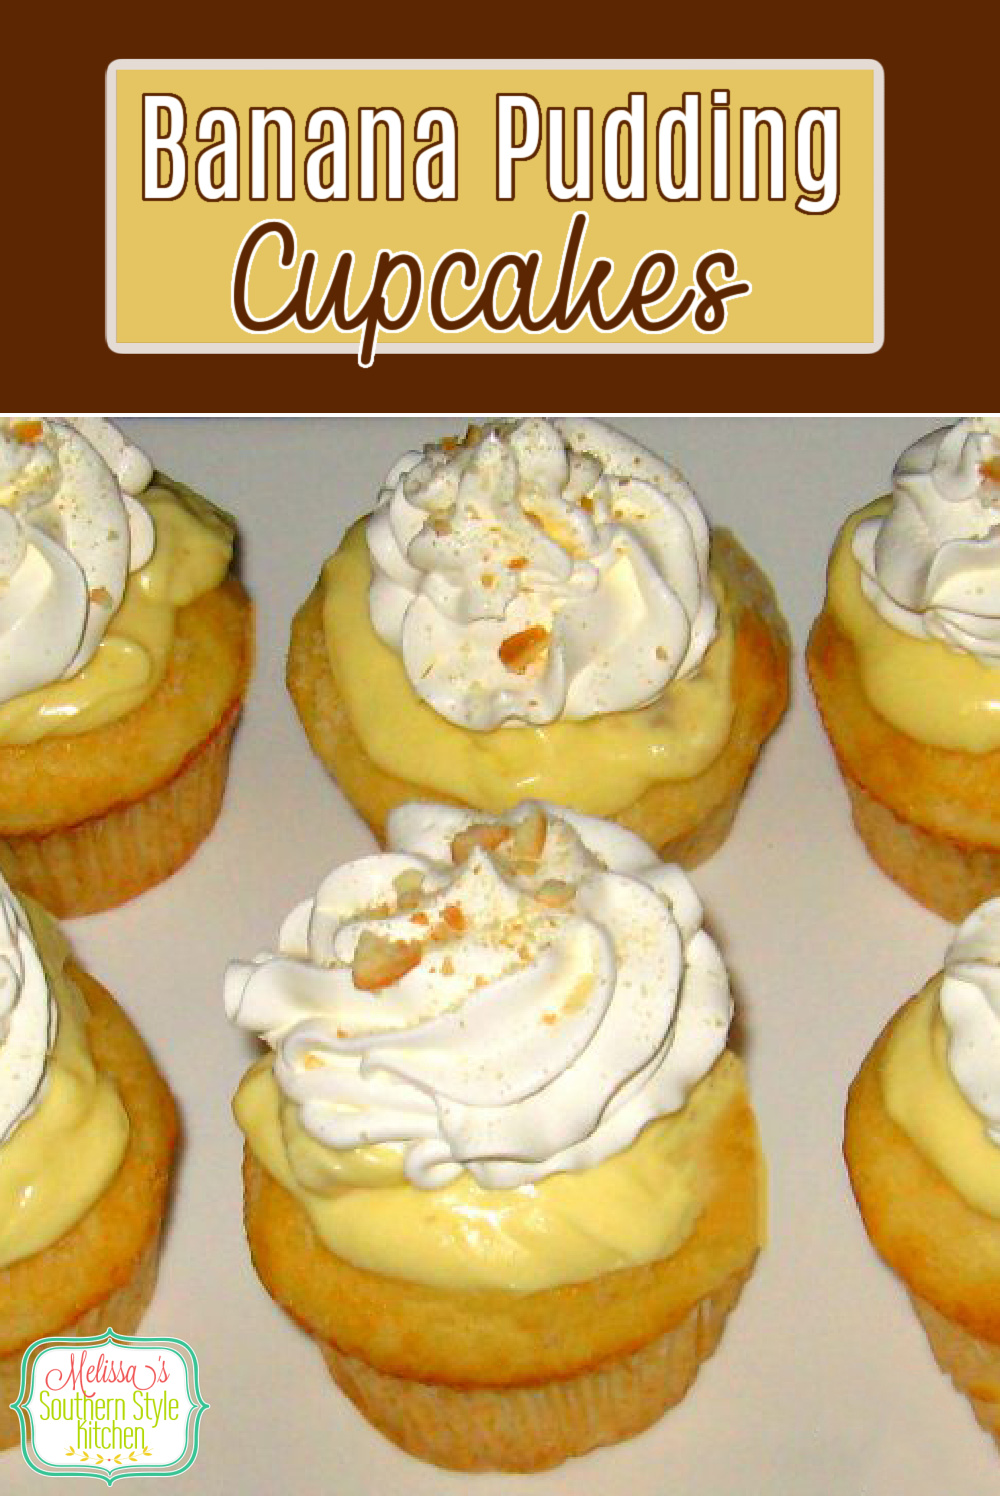 Banana Pudding Cupcakes are portable for picnics, barbecues, potluck parties and tailgating #bananapudding #bananapuddingcupcakes #bananas #pudding #southernbananapudding #cupcakes #desserts #dessertfoodrecipes